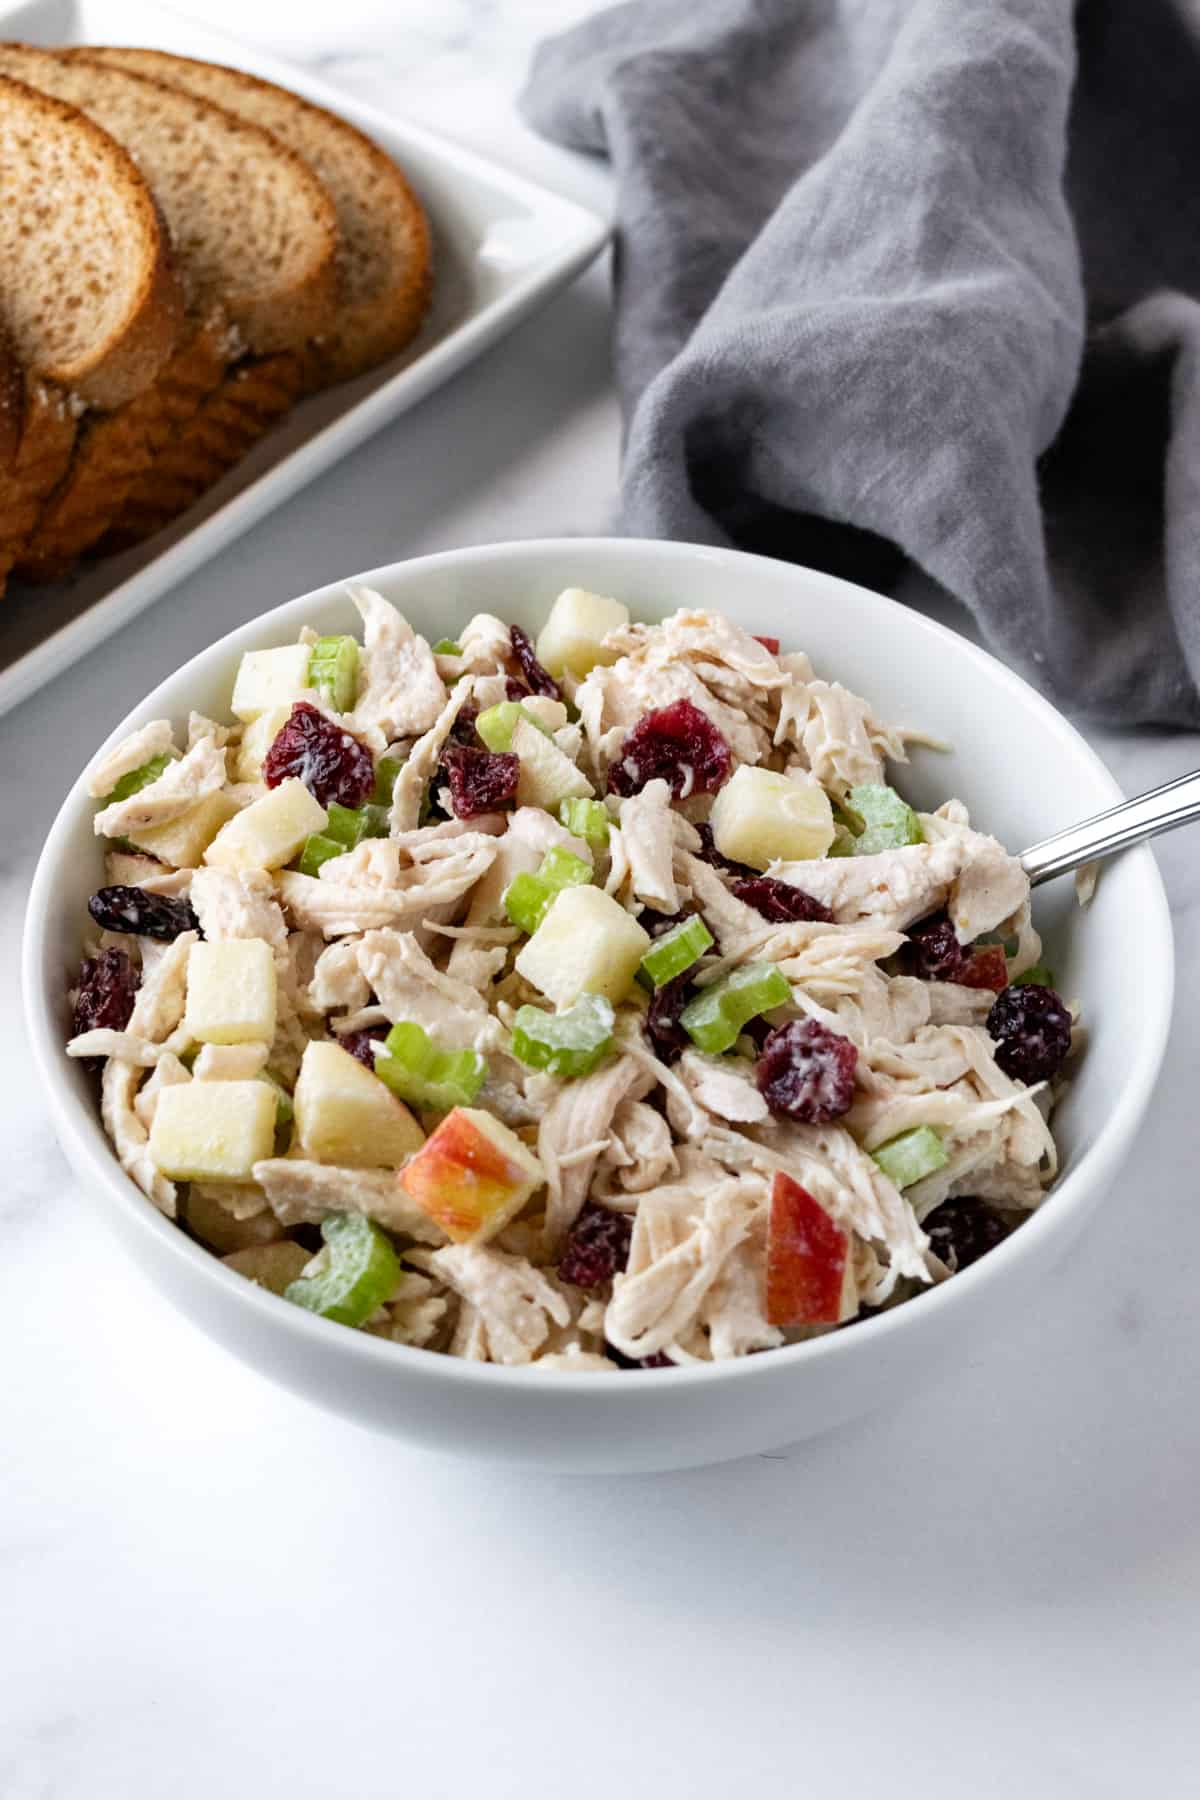 Apple Cranberry Chicken Salad in a White Bowl with a Spoon.